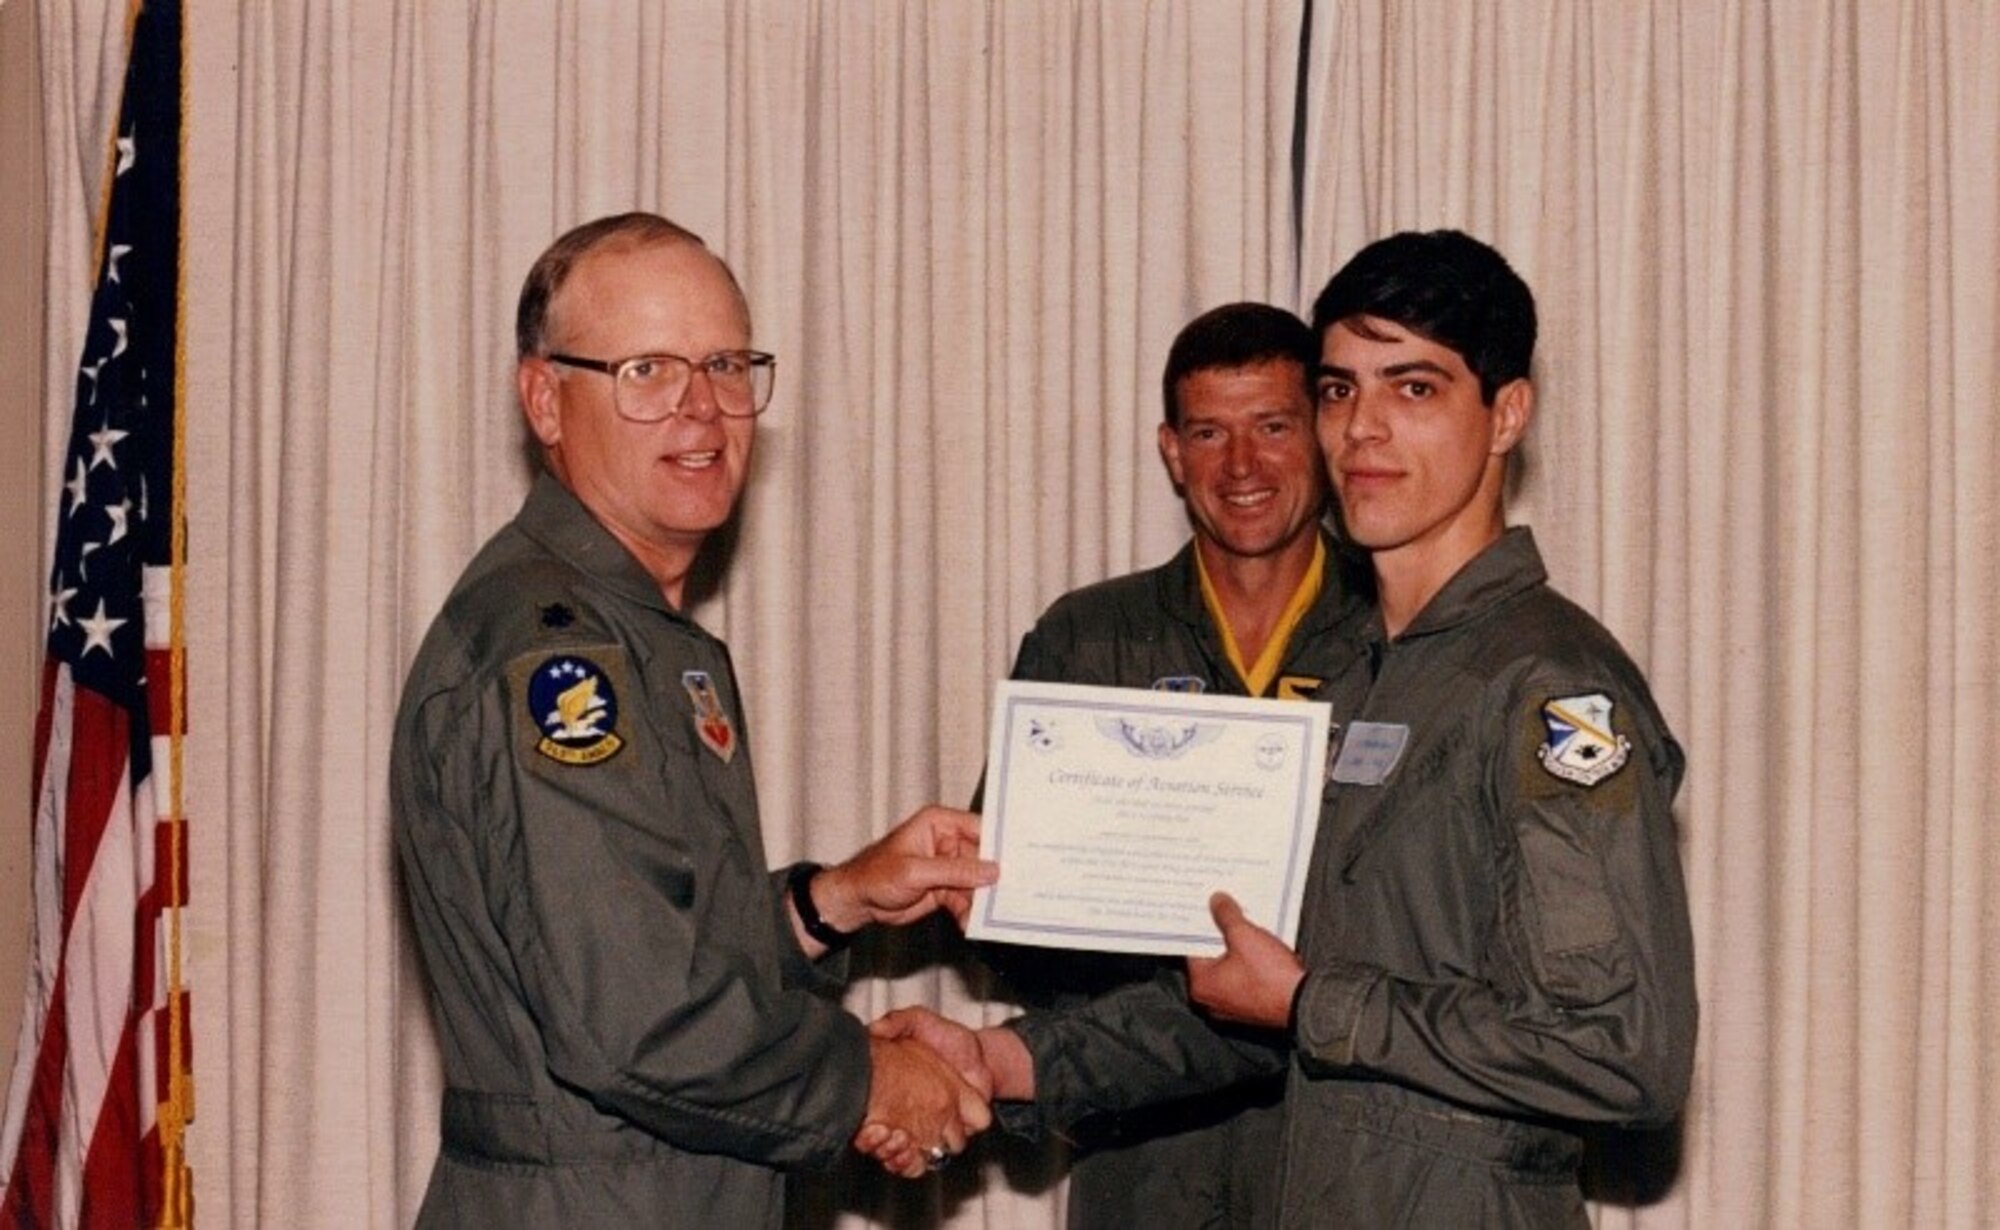 552nd Air Control Wing Command Chief, Chief Master Sgt. Kenny Mott, completed training as a Computer Display Maintenance Technician in September 1994 with the 966th Airborne Air Control Squadron. After training, he was transferred to the 965th AACS where he served seven years until he became a non-commissioned officer (Courtesy photo).